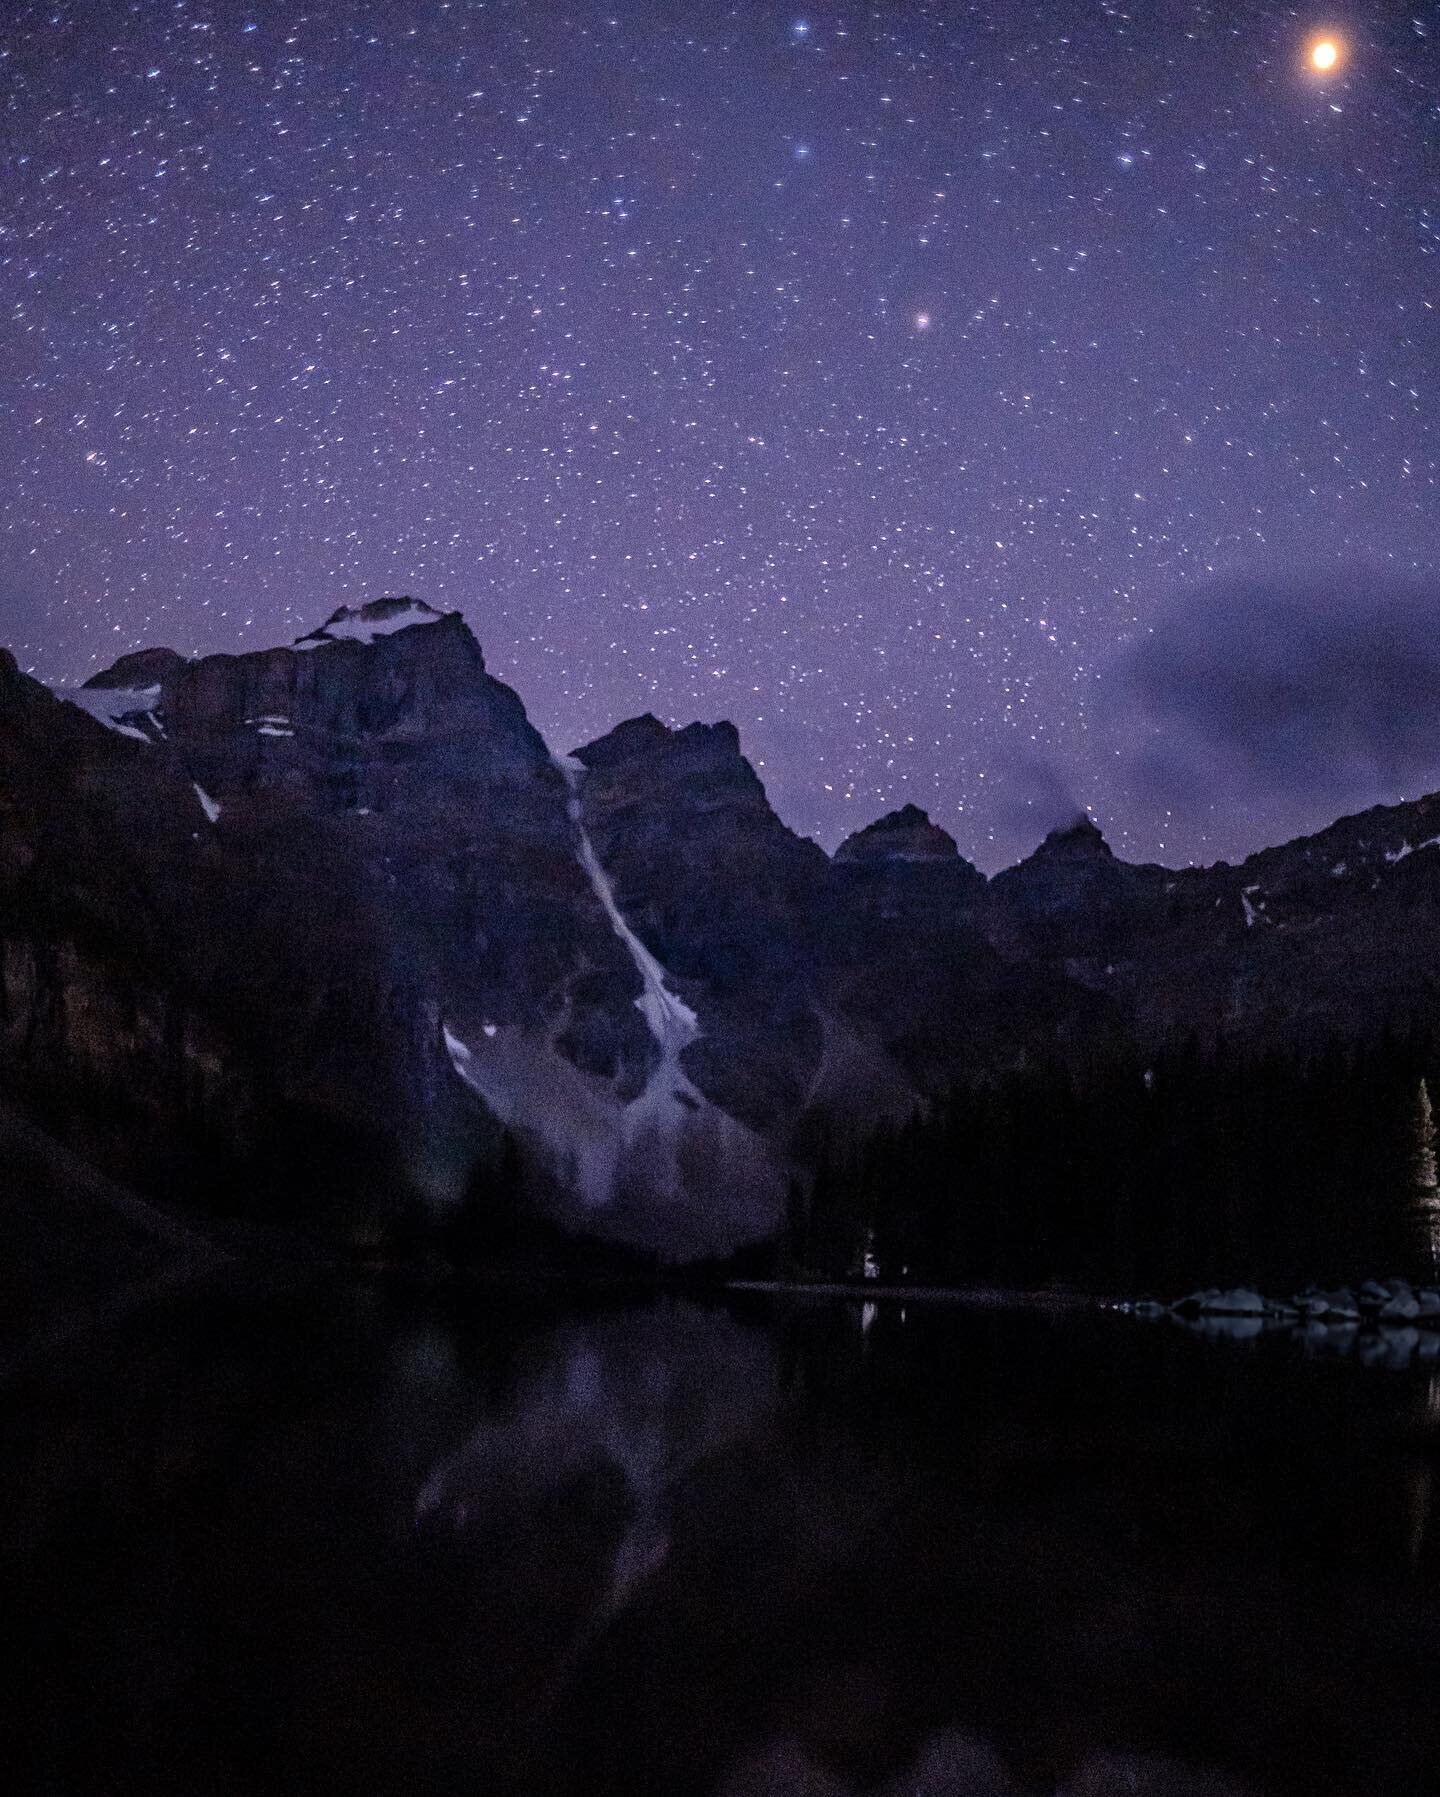 Took this photo at the trailhead for the Larch Valley hike at Moraine Lake, AB. It was pitch black, so I cranked the ISO on my Sony A7iii and placed the camera on a rock to keep it steady. To my surprise, I was able to capture Mars passing by over th